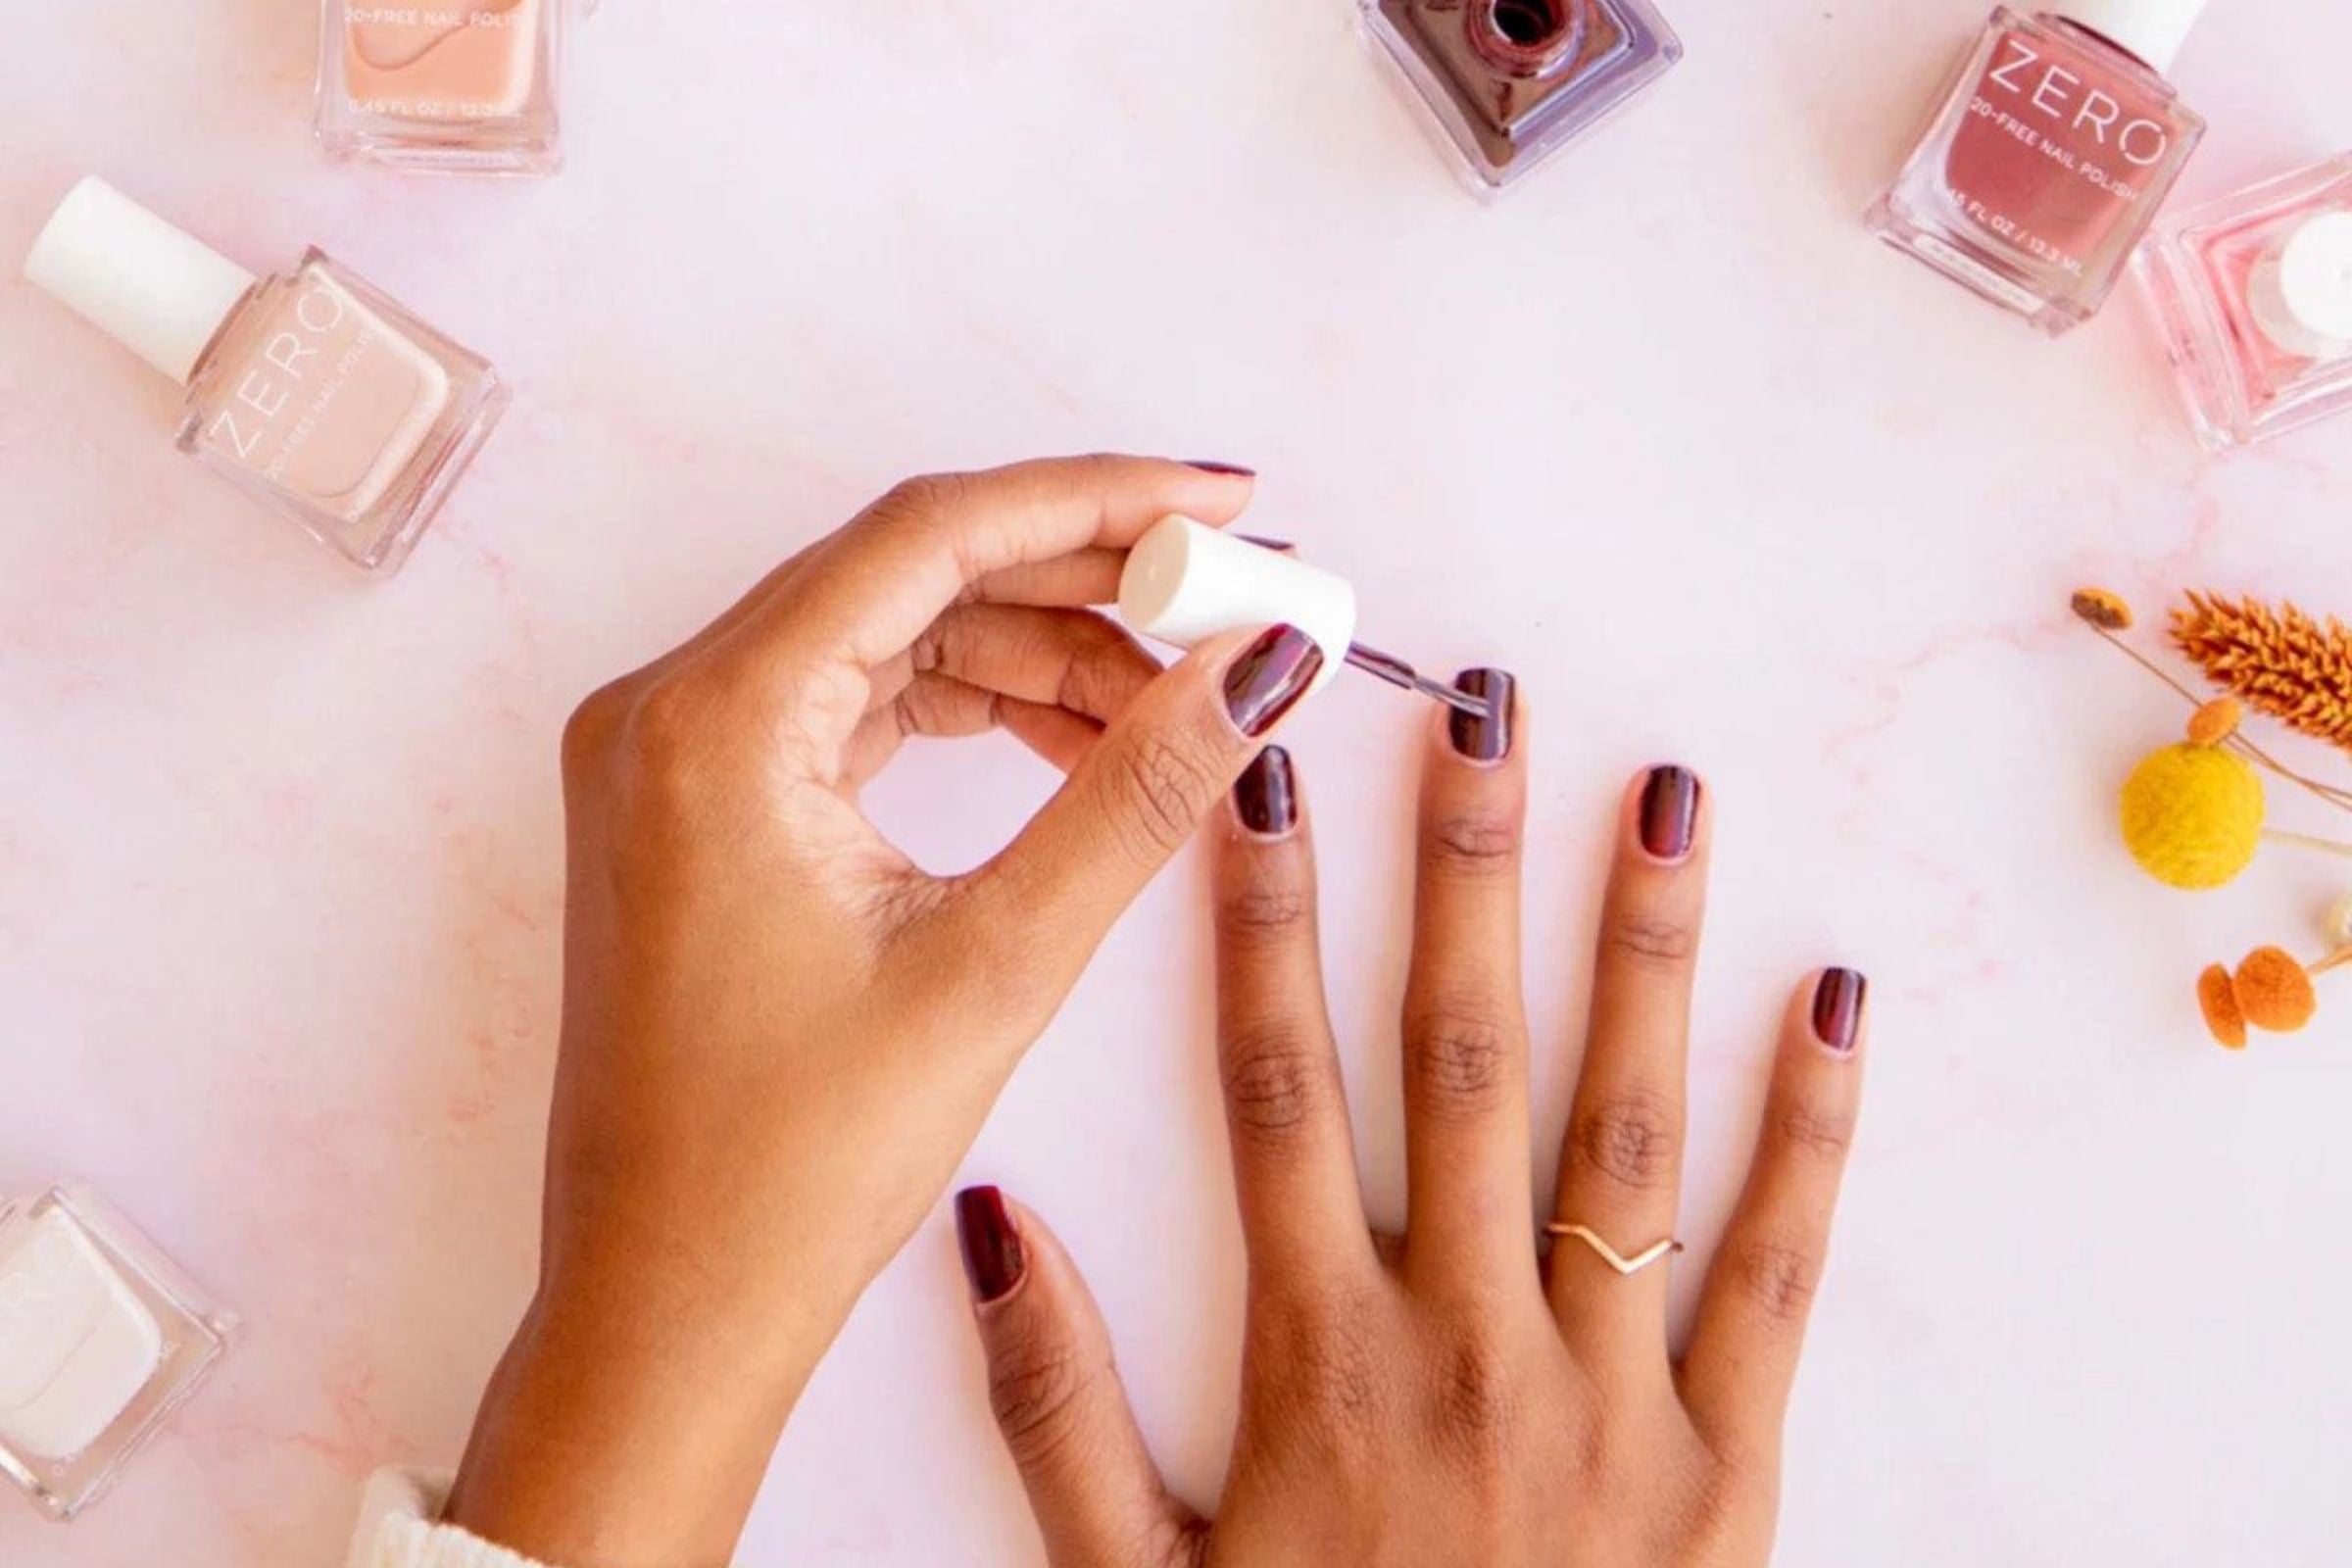 Which Gelish system works best for my nail needs? – Scratch